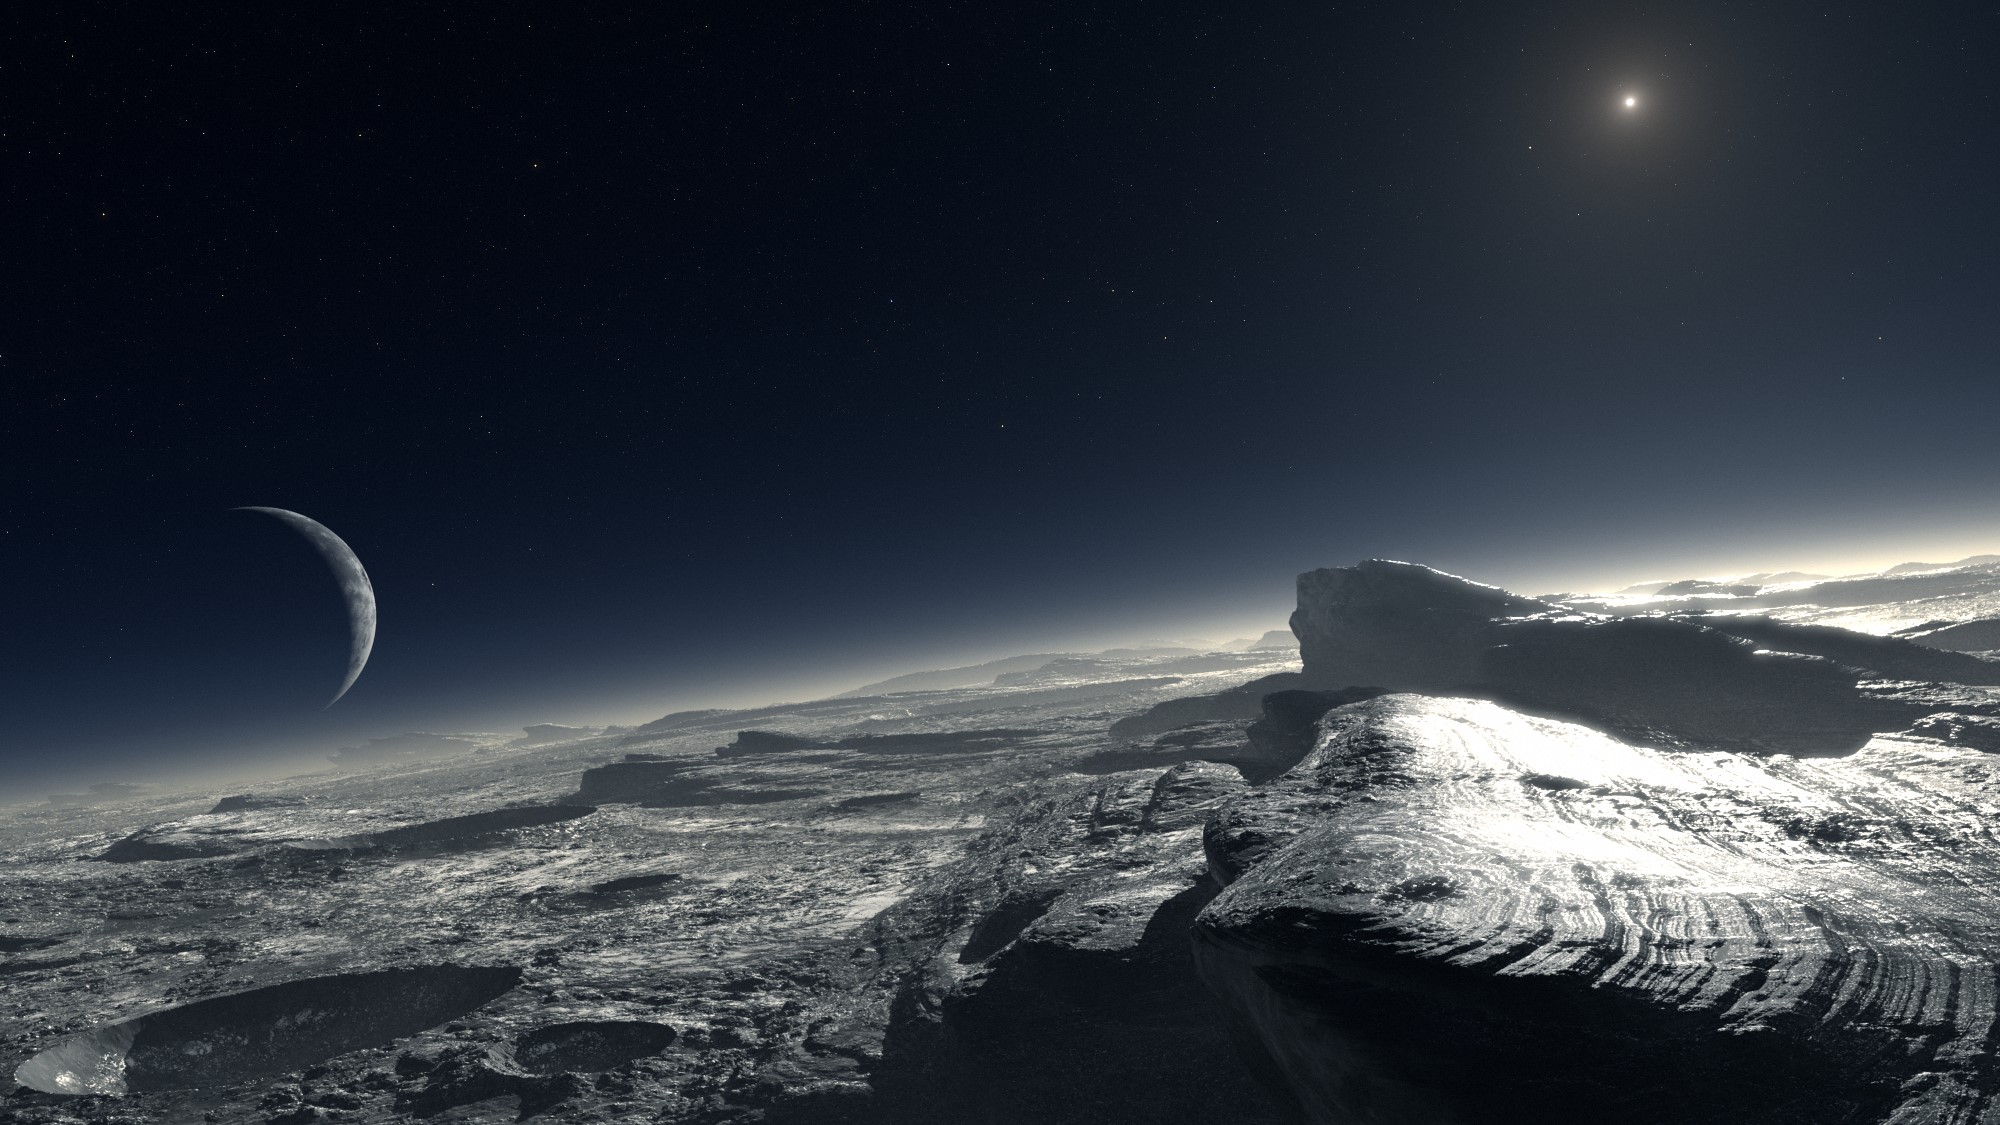 Pluto hd wallpapers backgrounds